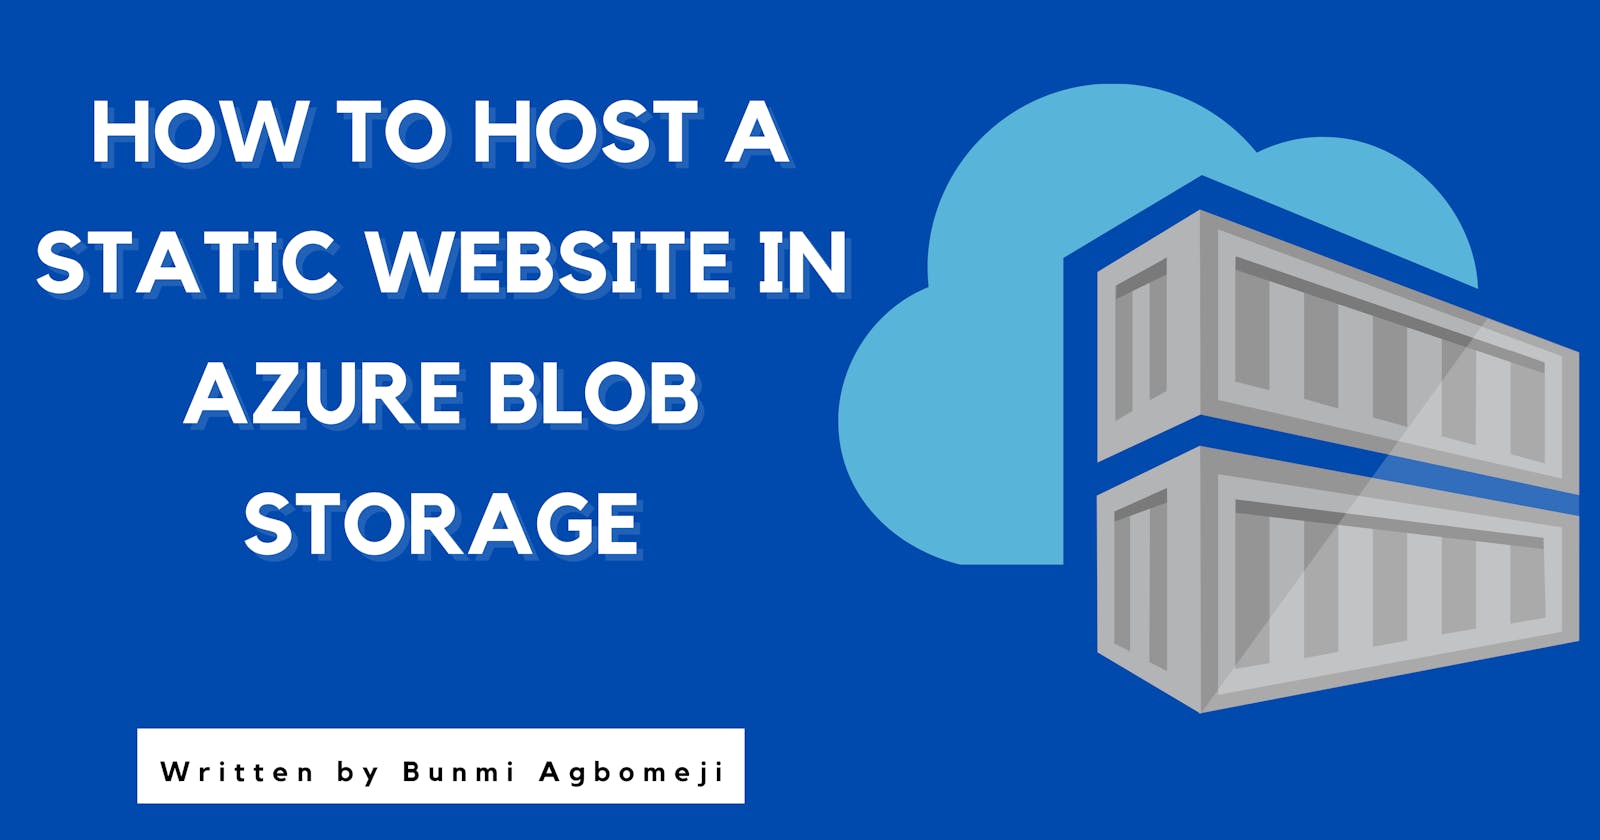 How To Host a Static Website in Azure Blob Storage.